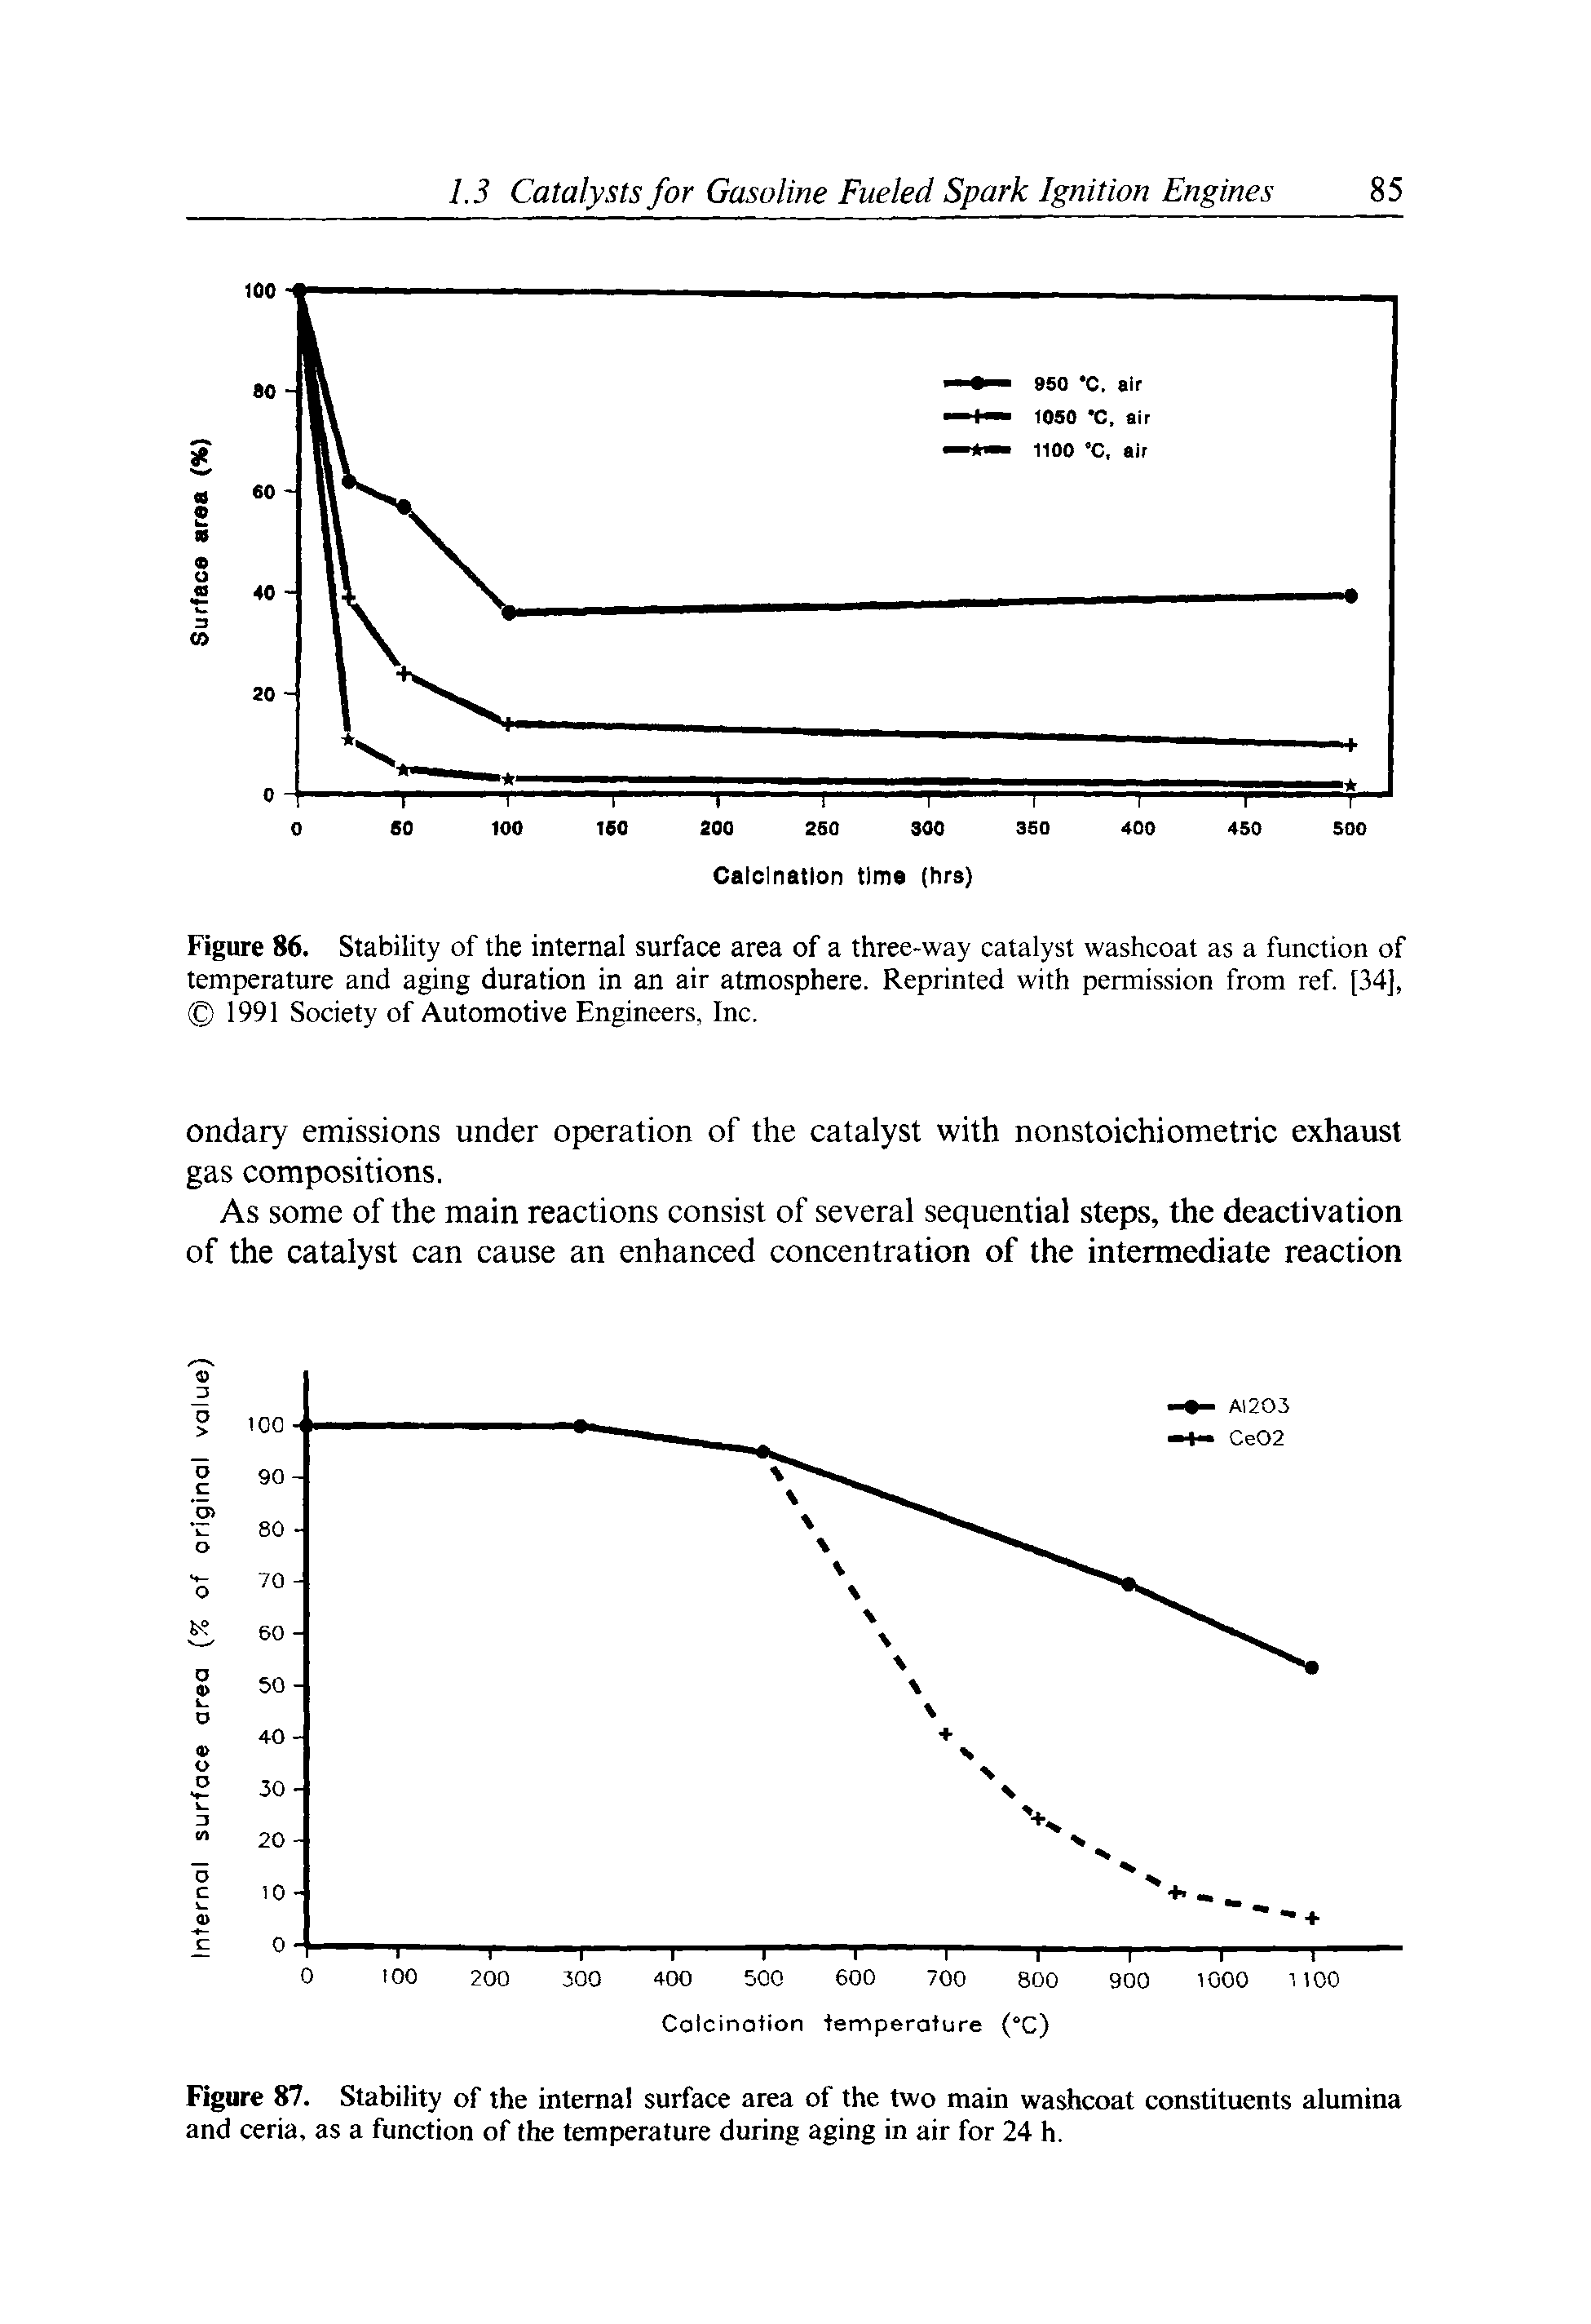 Figure 86. Stability of the internal surface area of a three-way catalyst washcoat as a function of temperature and aging duration in an air atmosphere. Reprinted with permission from ref [34], CO 1991 Society of Automotive Engineers, Inc.